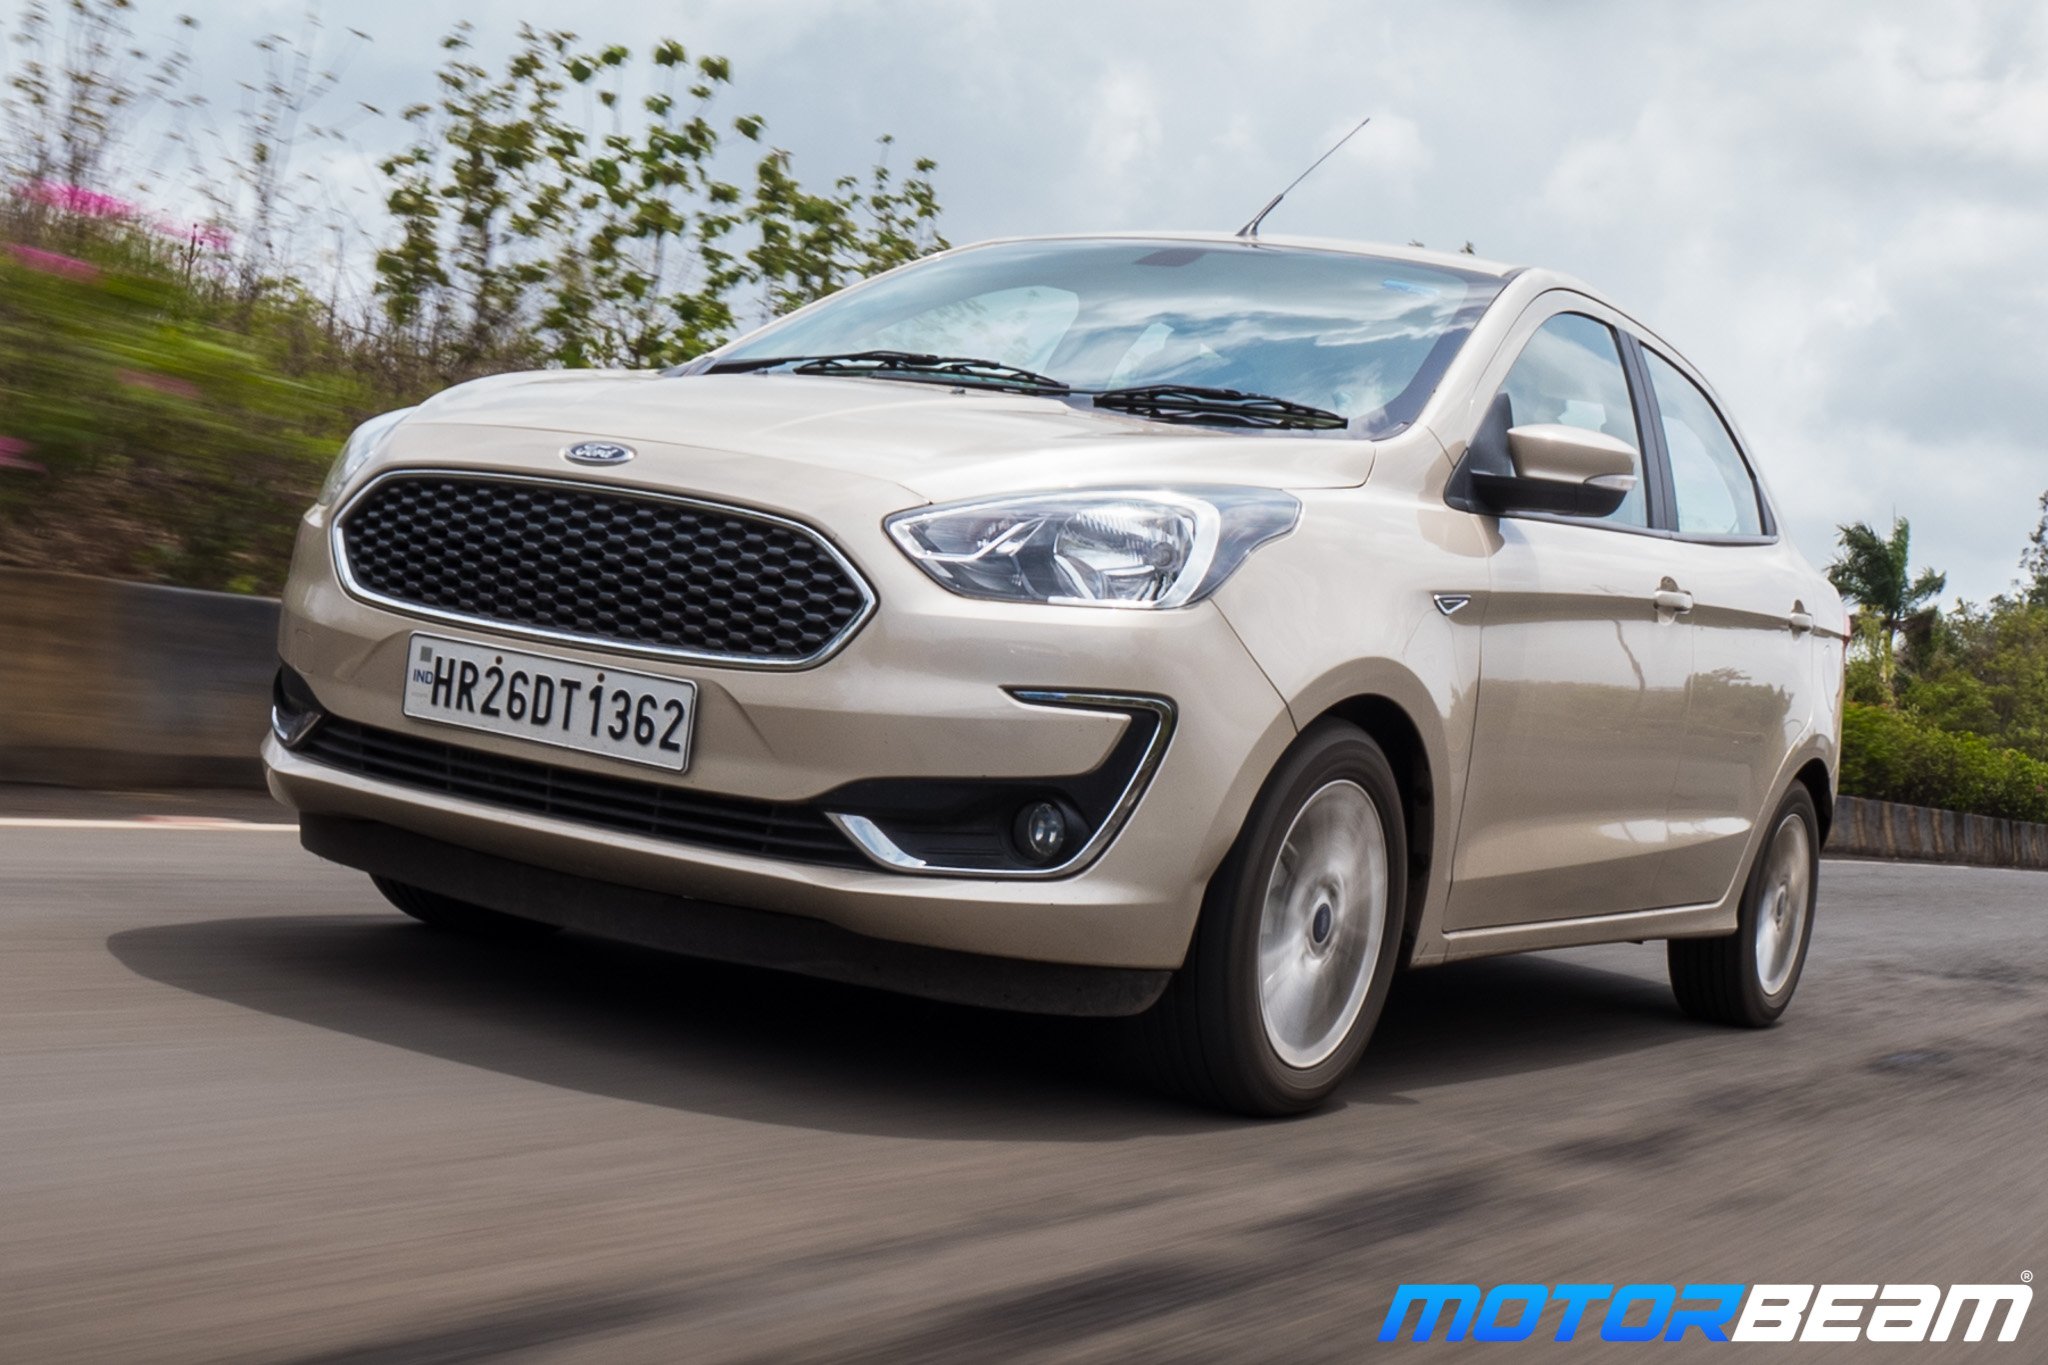 Ford Aspire Facelift Long Term Review